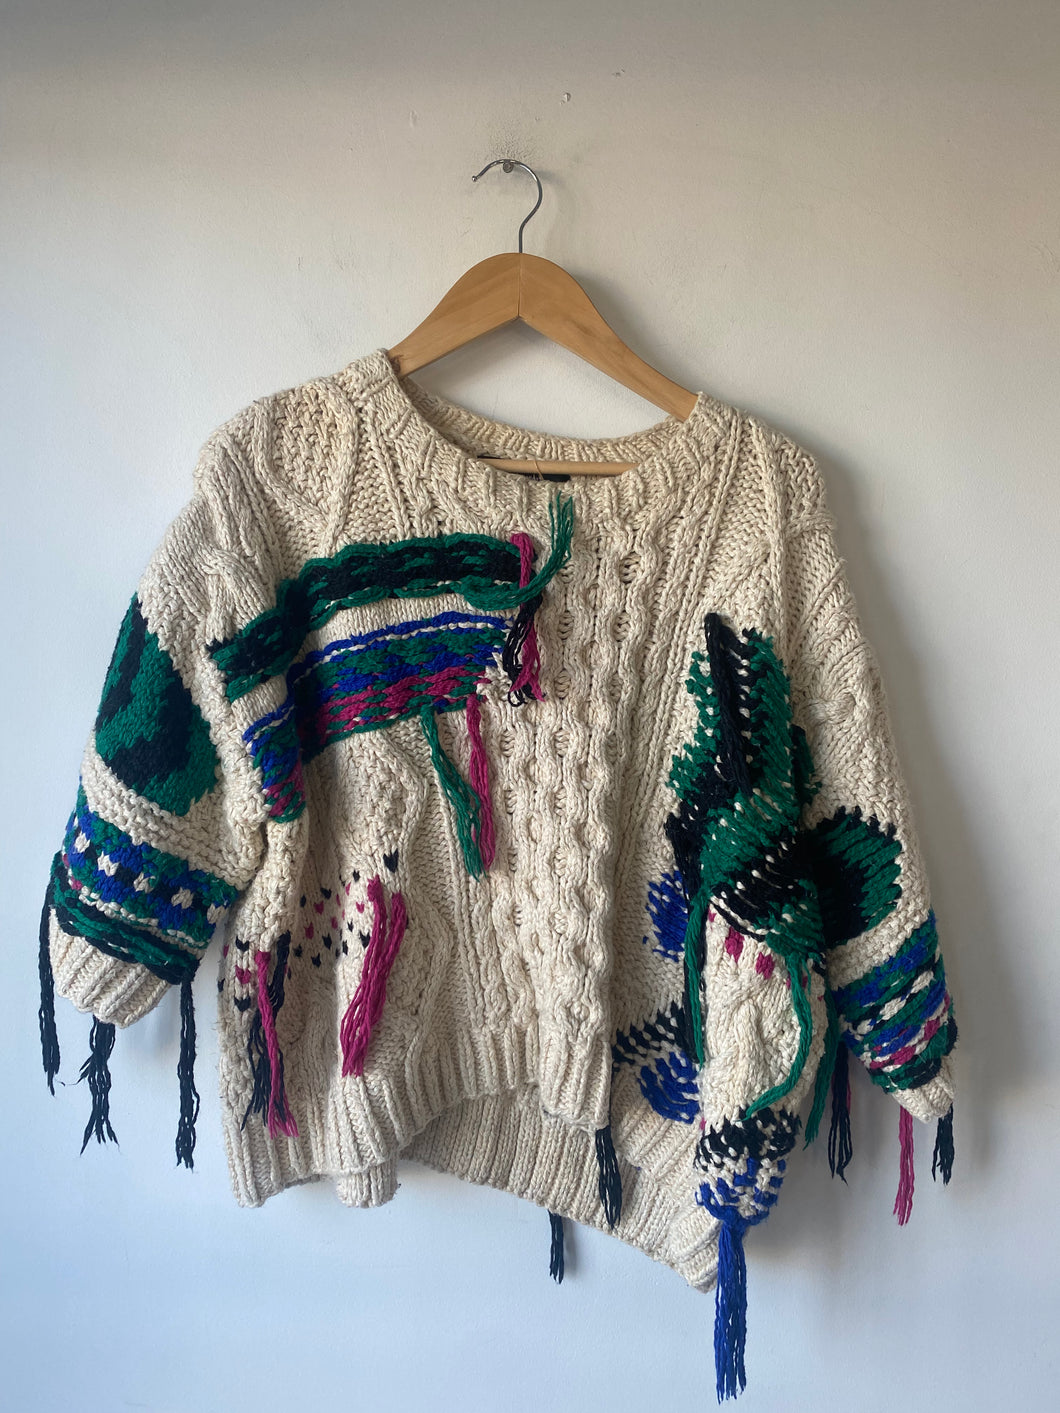 Isabel Marant White and Green Knit Sweater